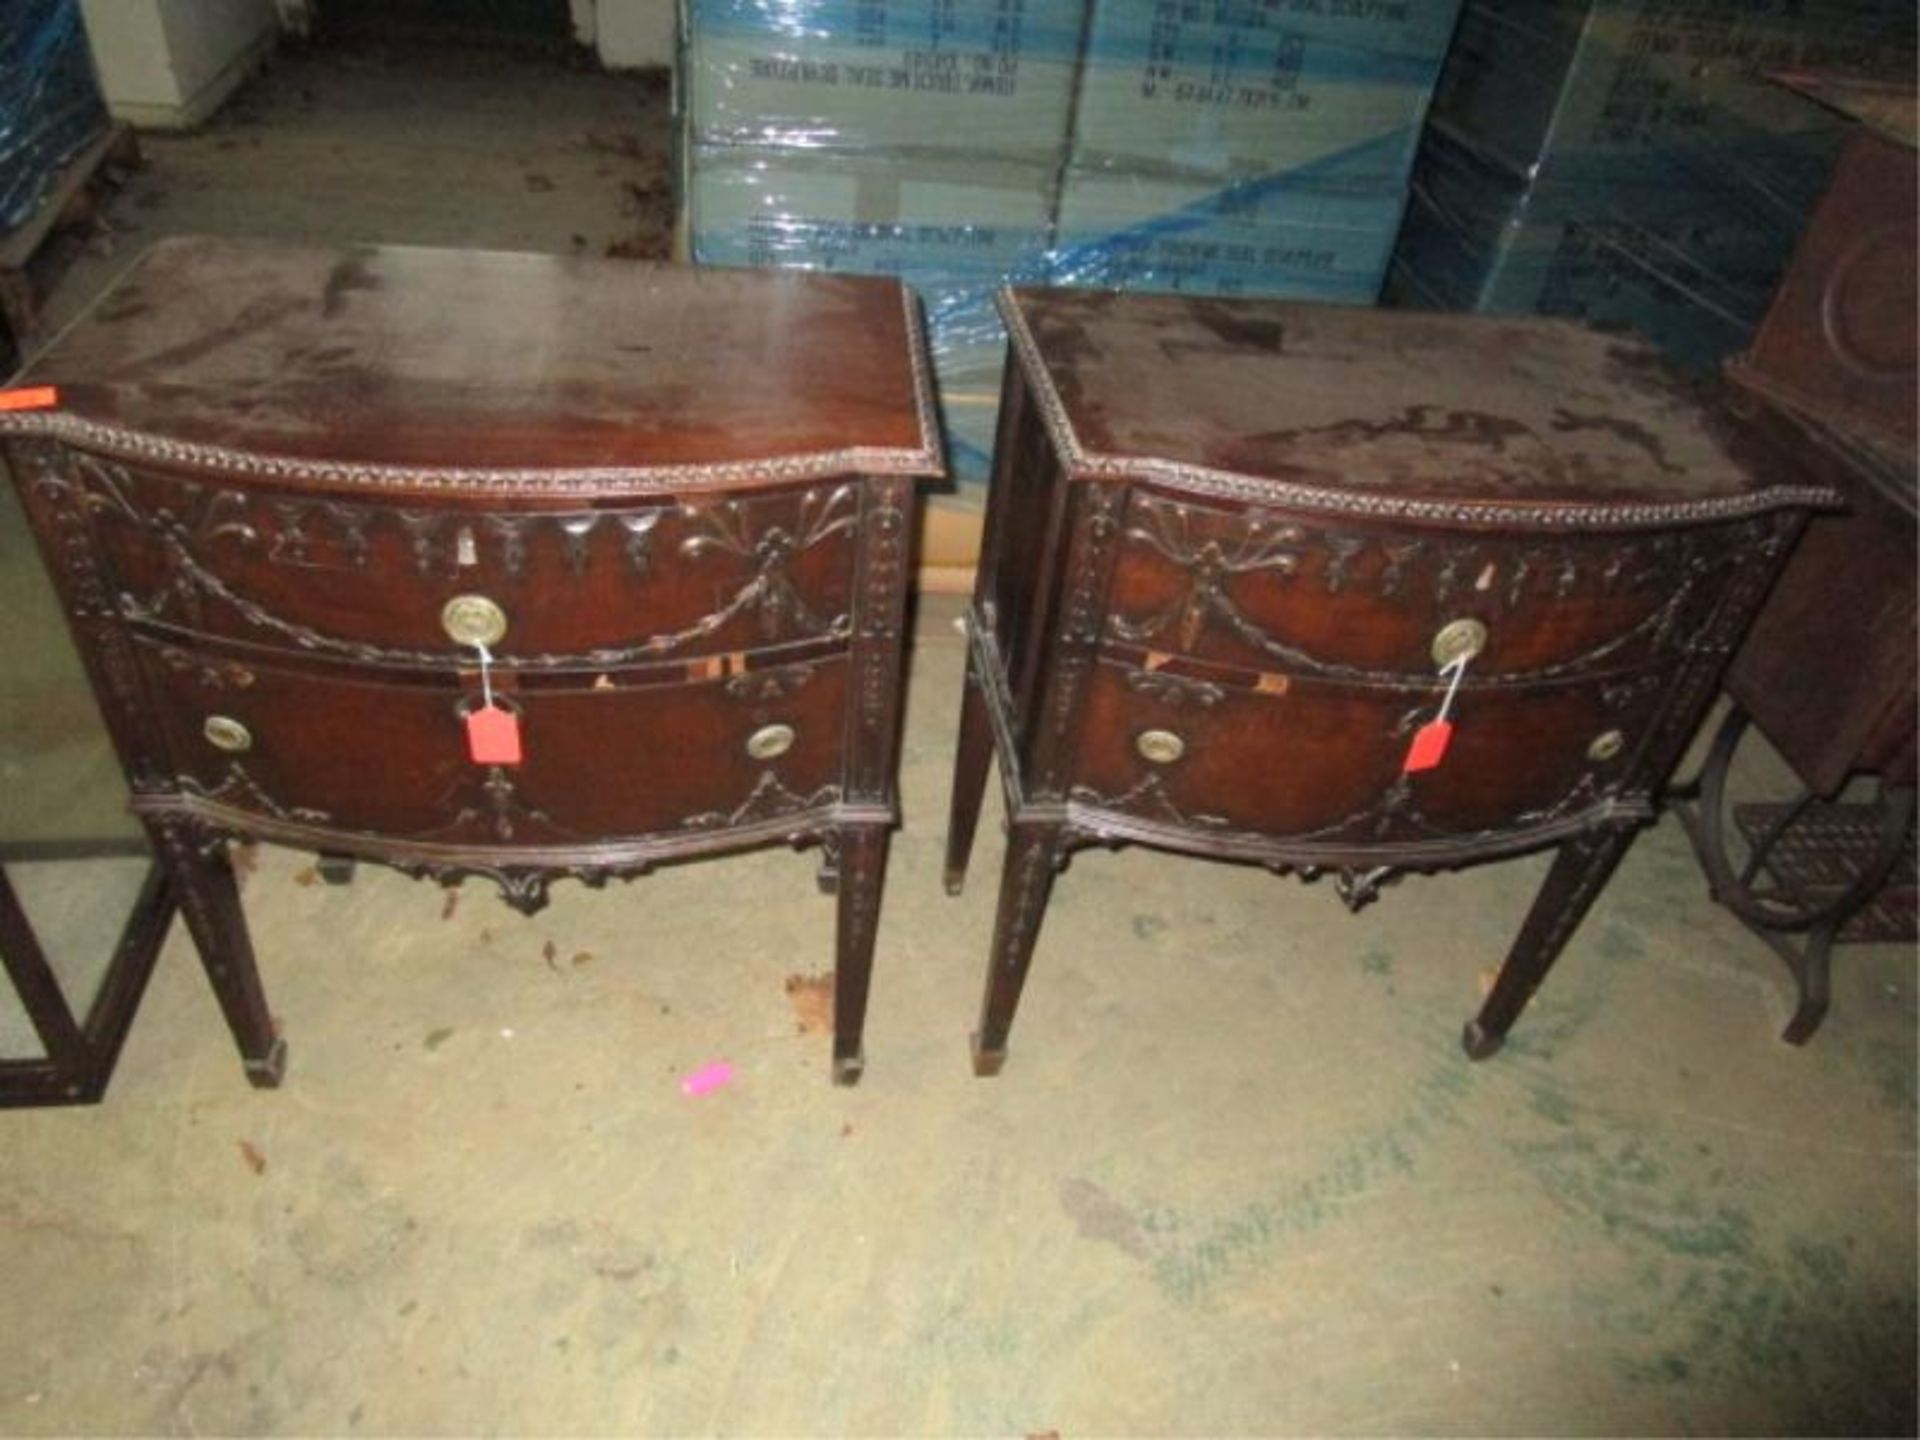 Pair of Stands, mahogany, two drawers, applied design, veneer damageon both, 27" l x 17" w x 31" h